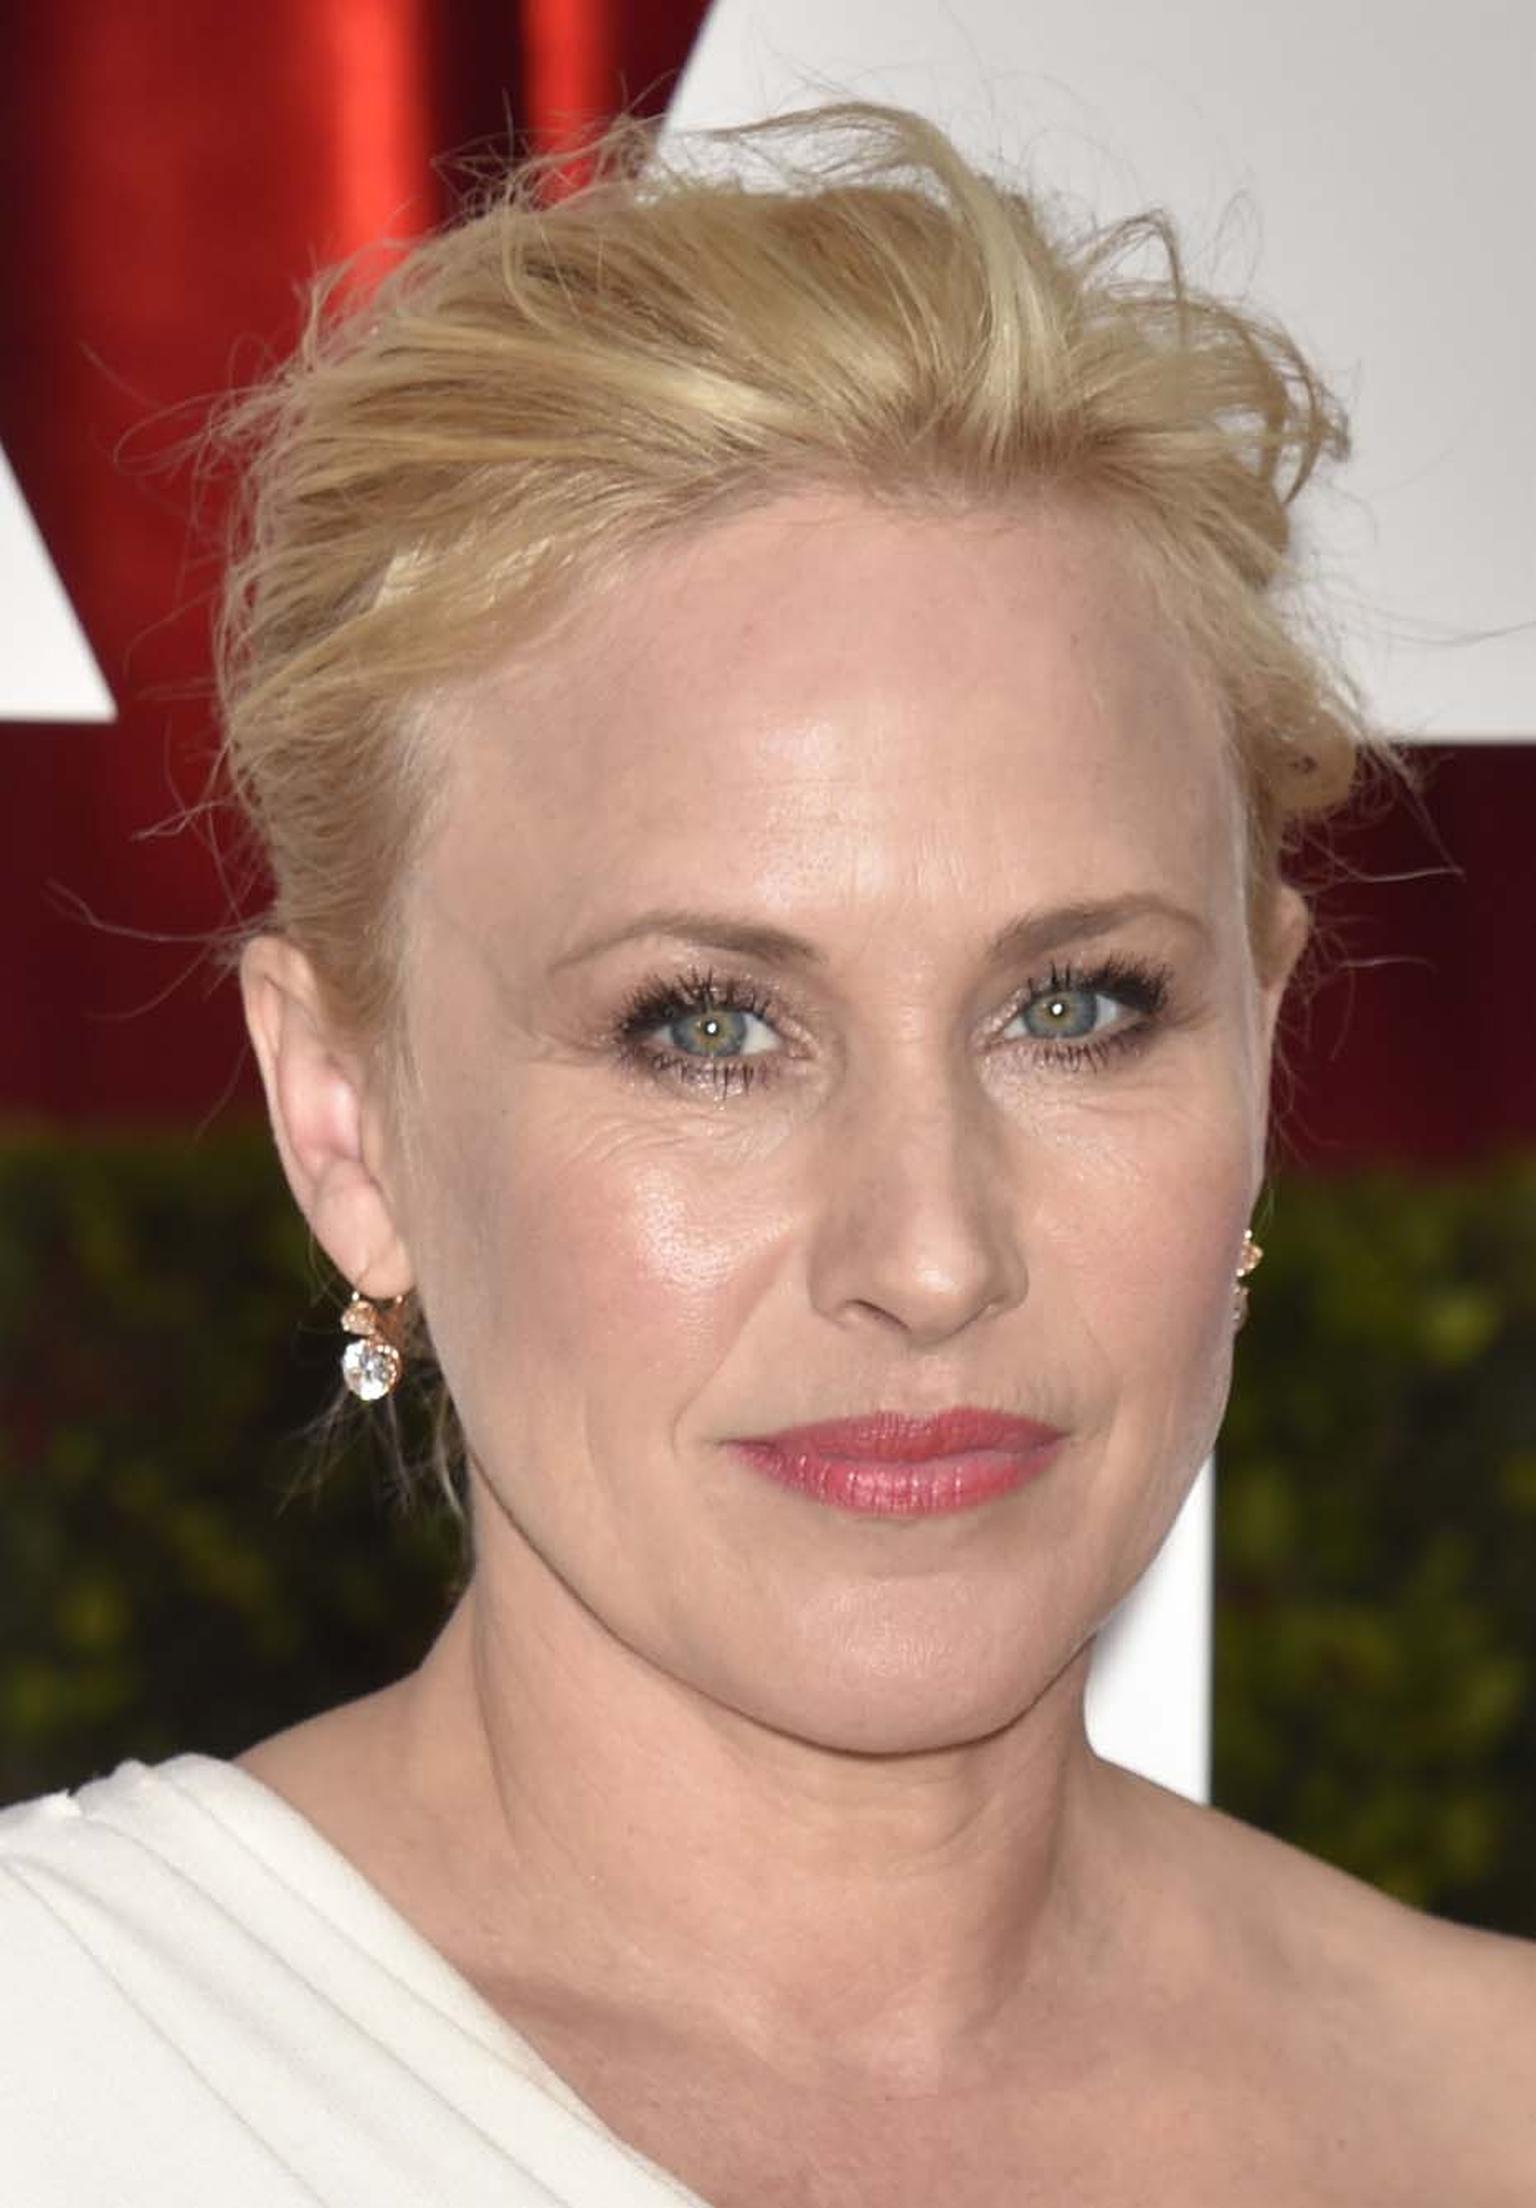 Oscar-winning Best Supporting Actress, Patricia Arquette, may be remembered more for her feminist-driven equal rights acceptance speech, but her understated gown, accessorized with a pair of Fred Leighton diamond earrings, was the epitome of grown-up chic